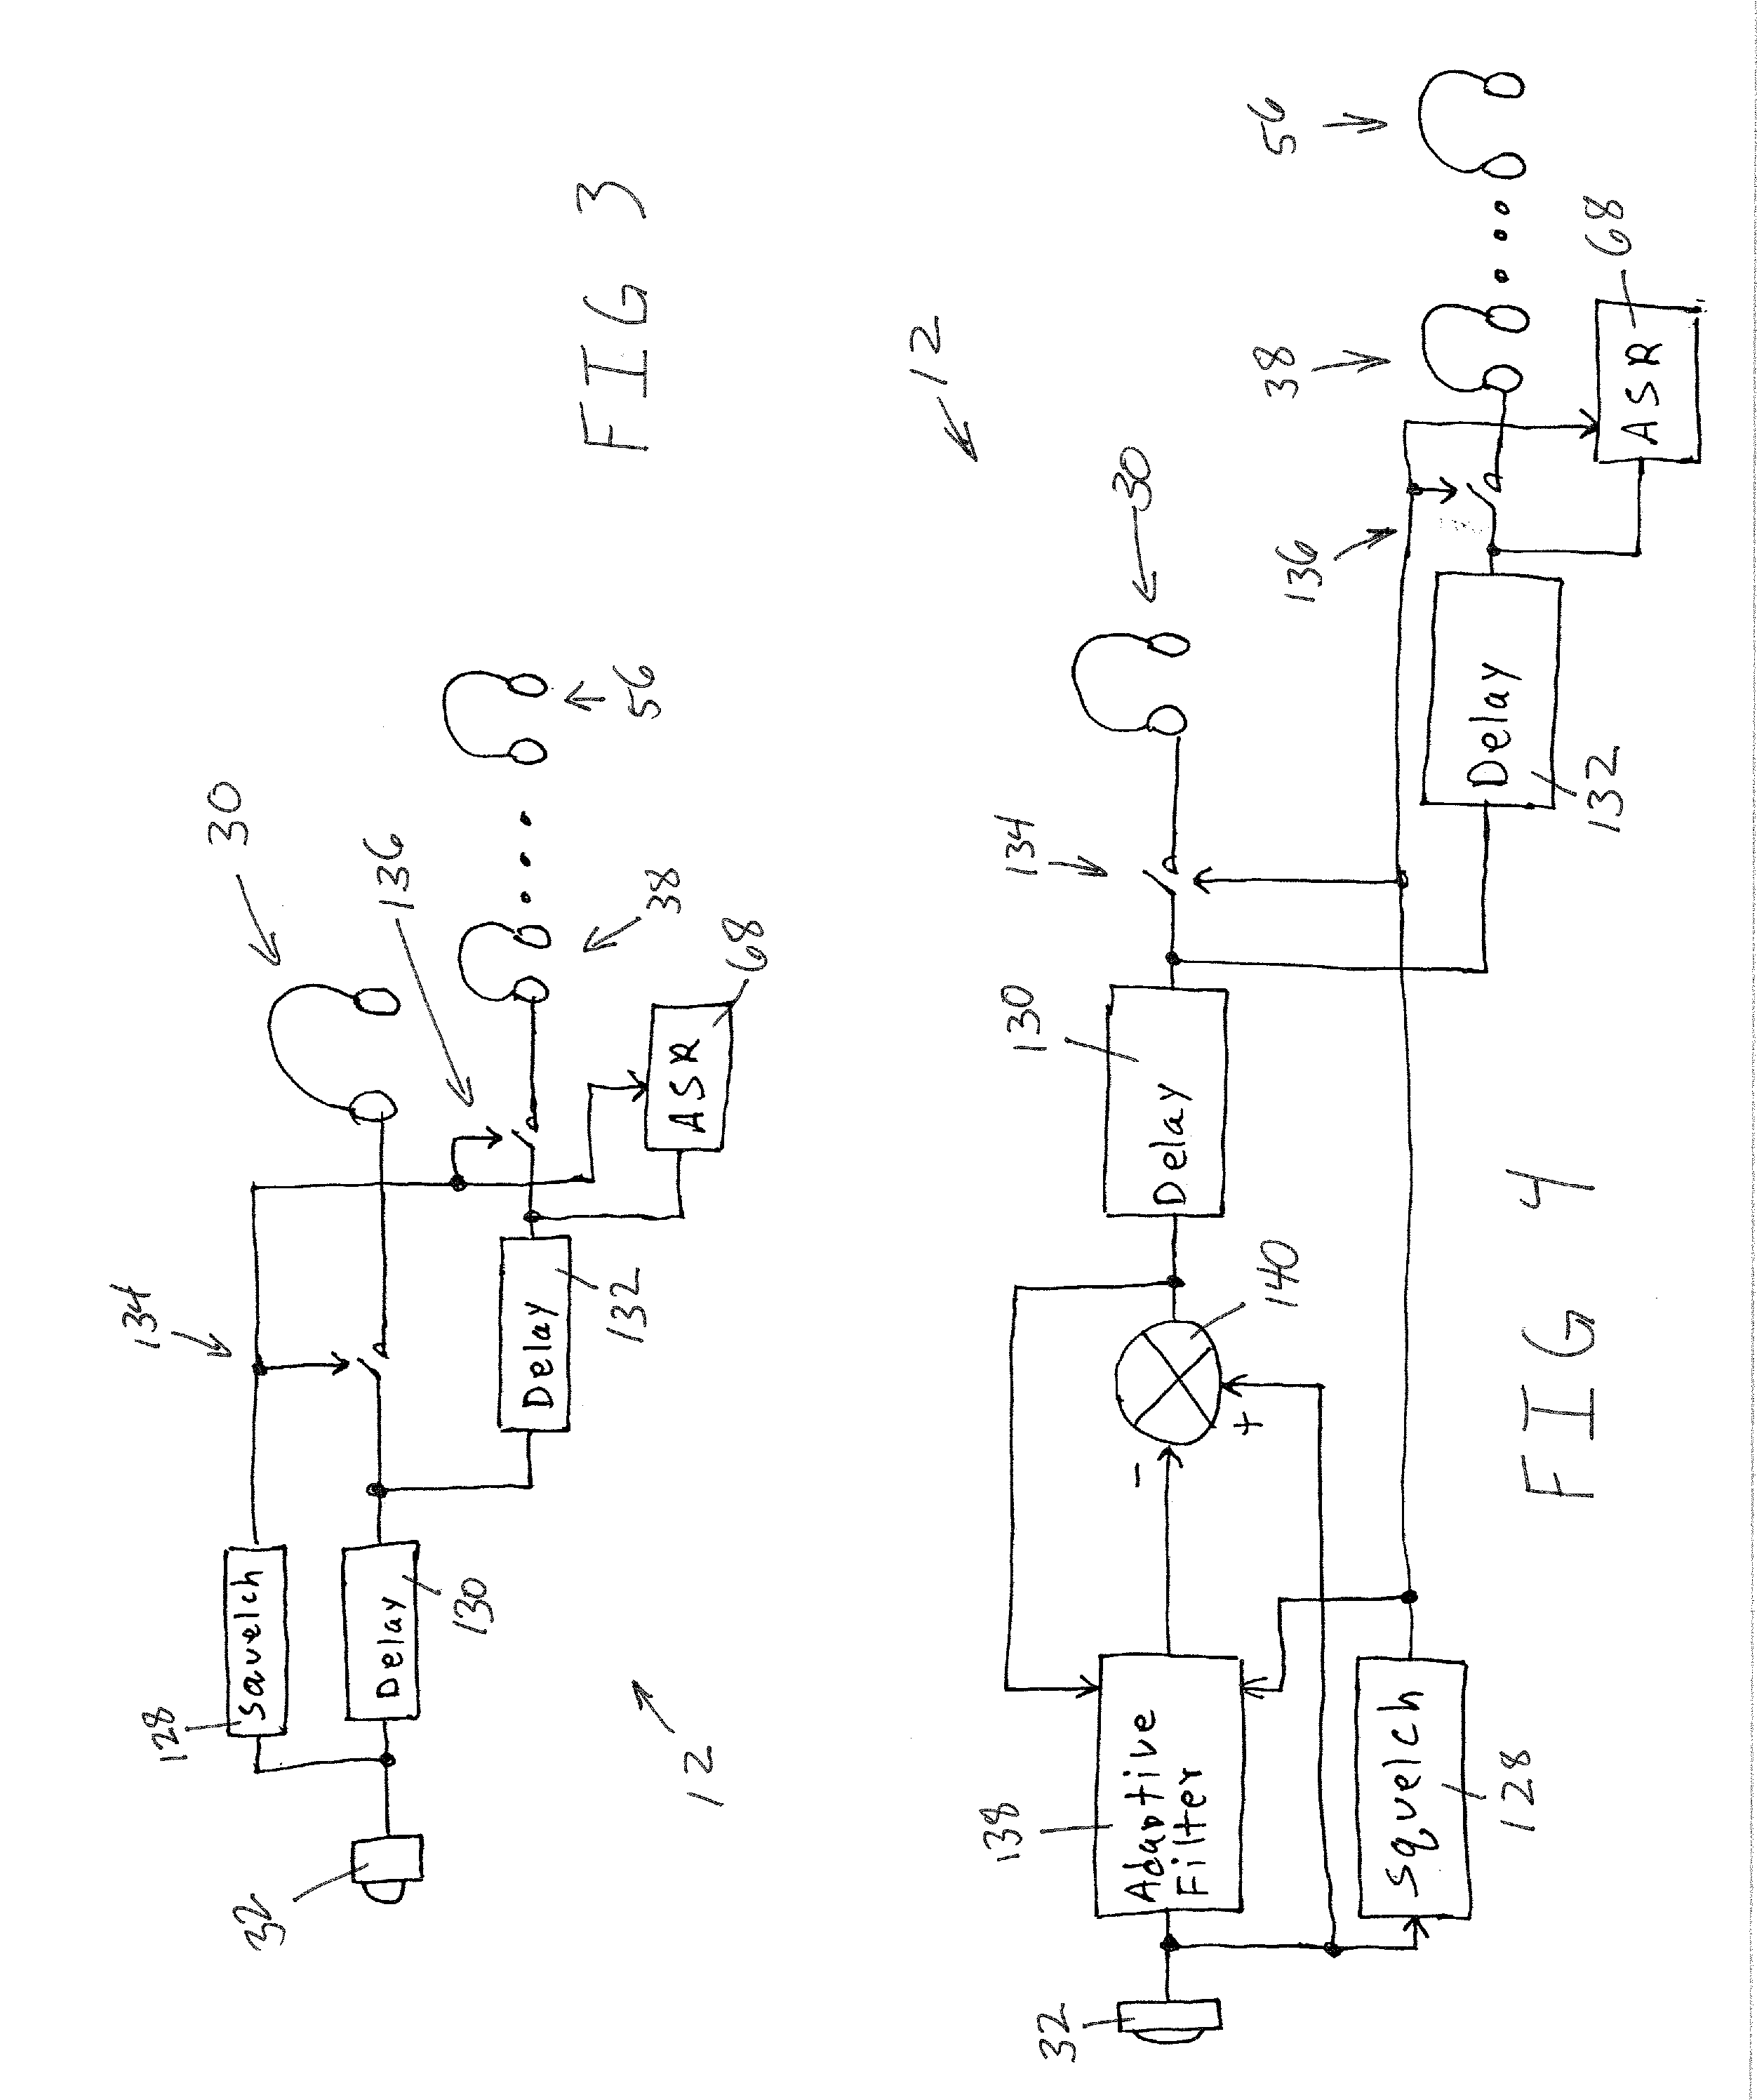 Automatic speech recognition system and method for aircraft